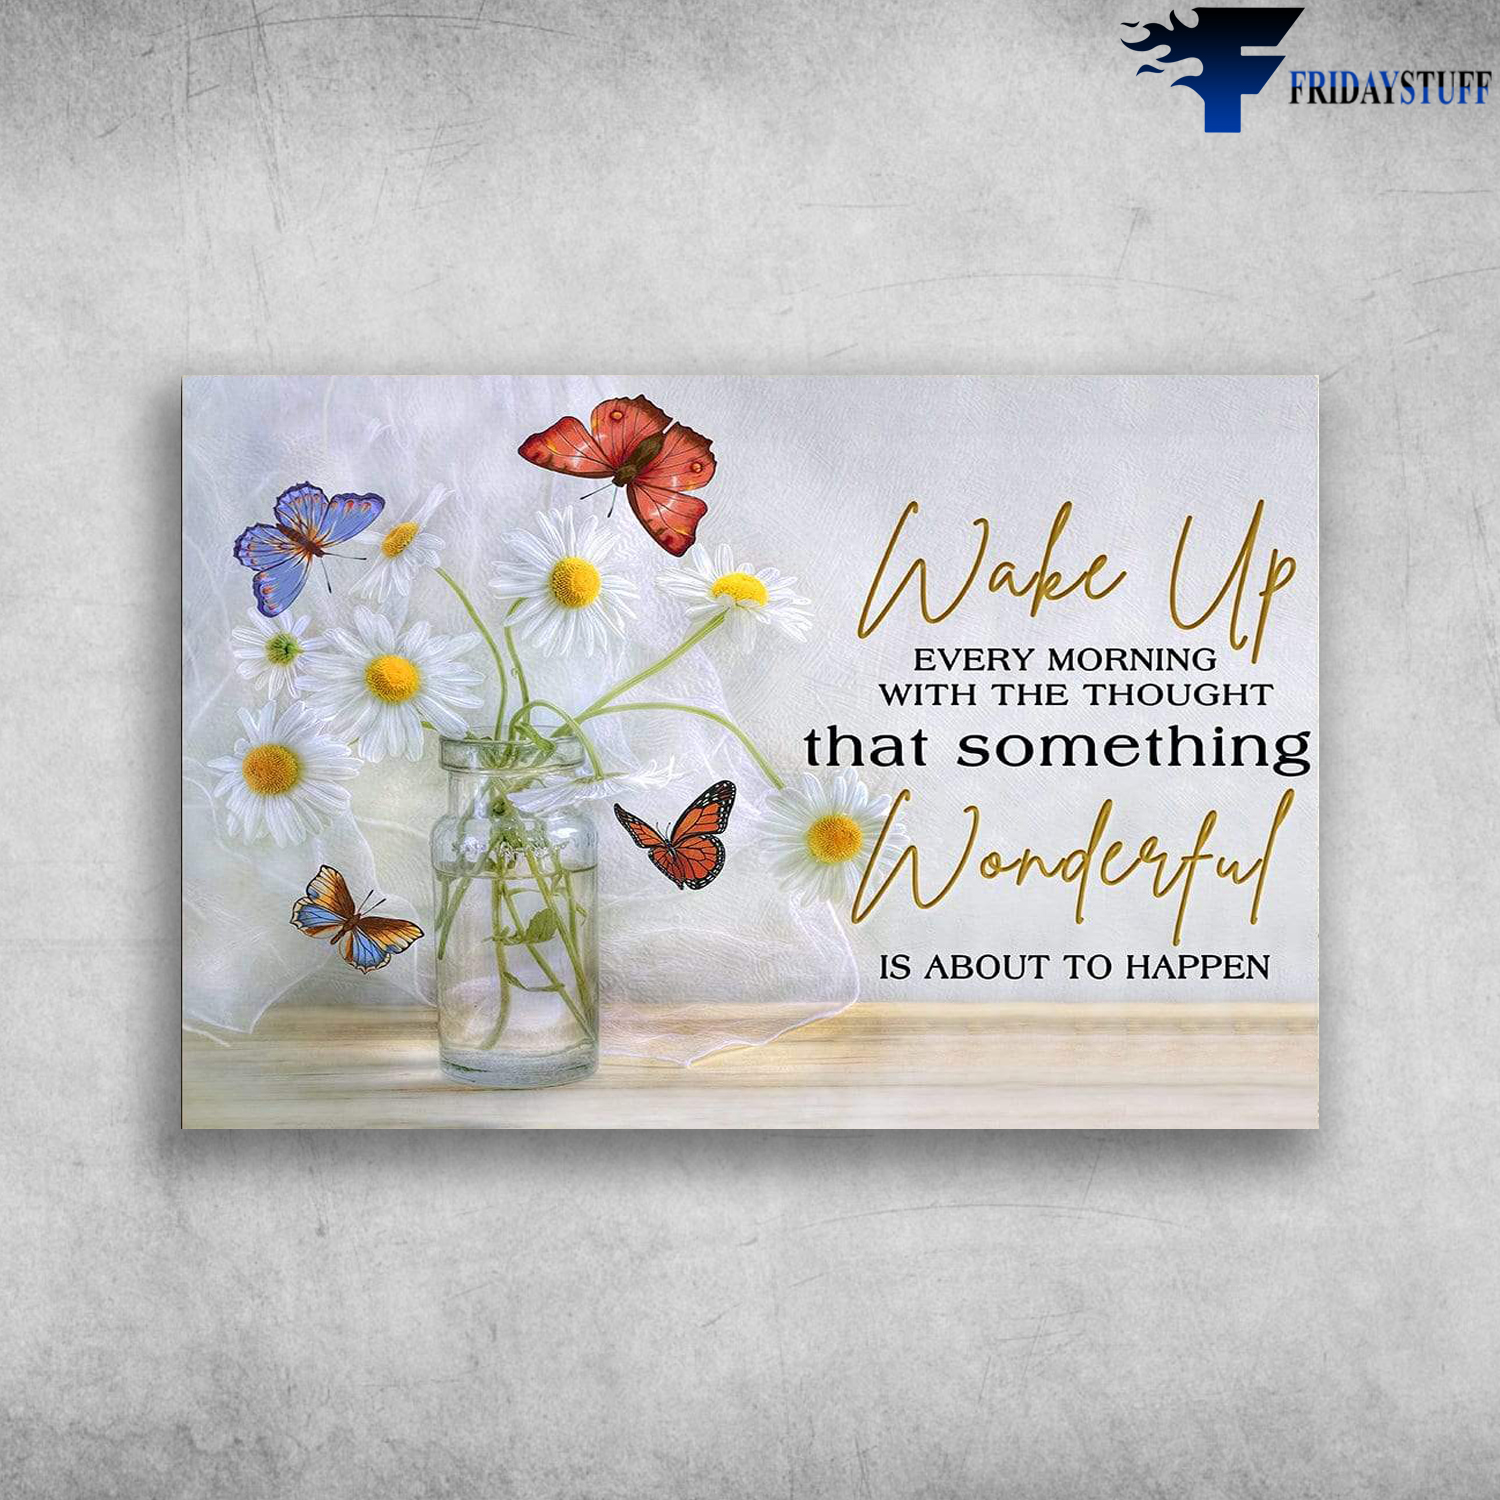 Butterfly And Flowers - Wake Up Every Morning With The Thought That Something Wonderful